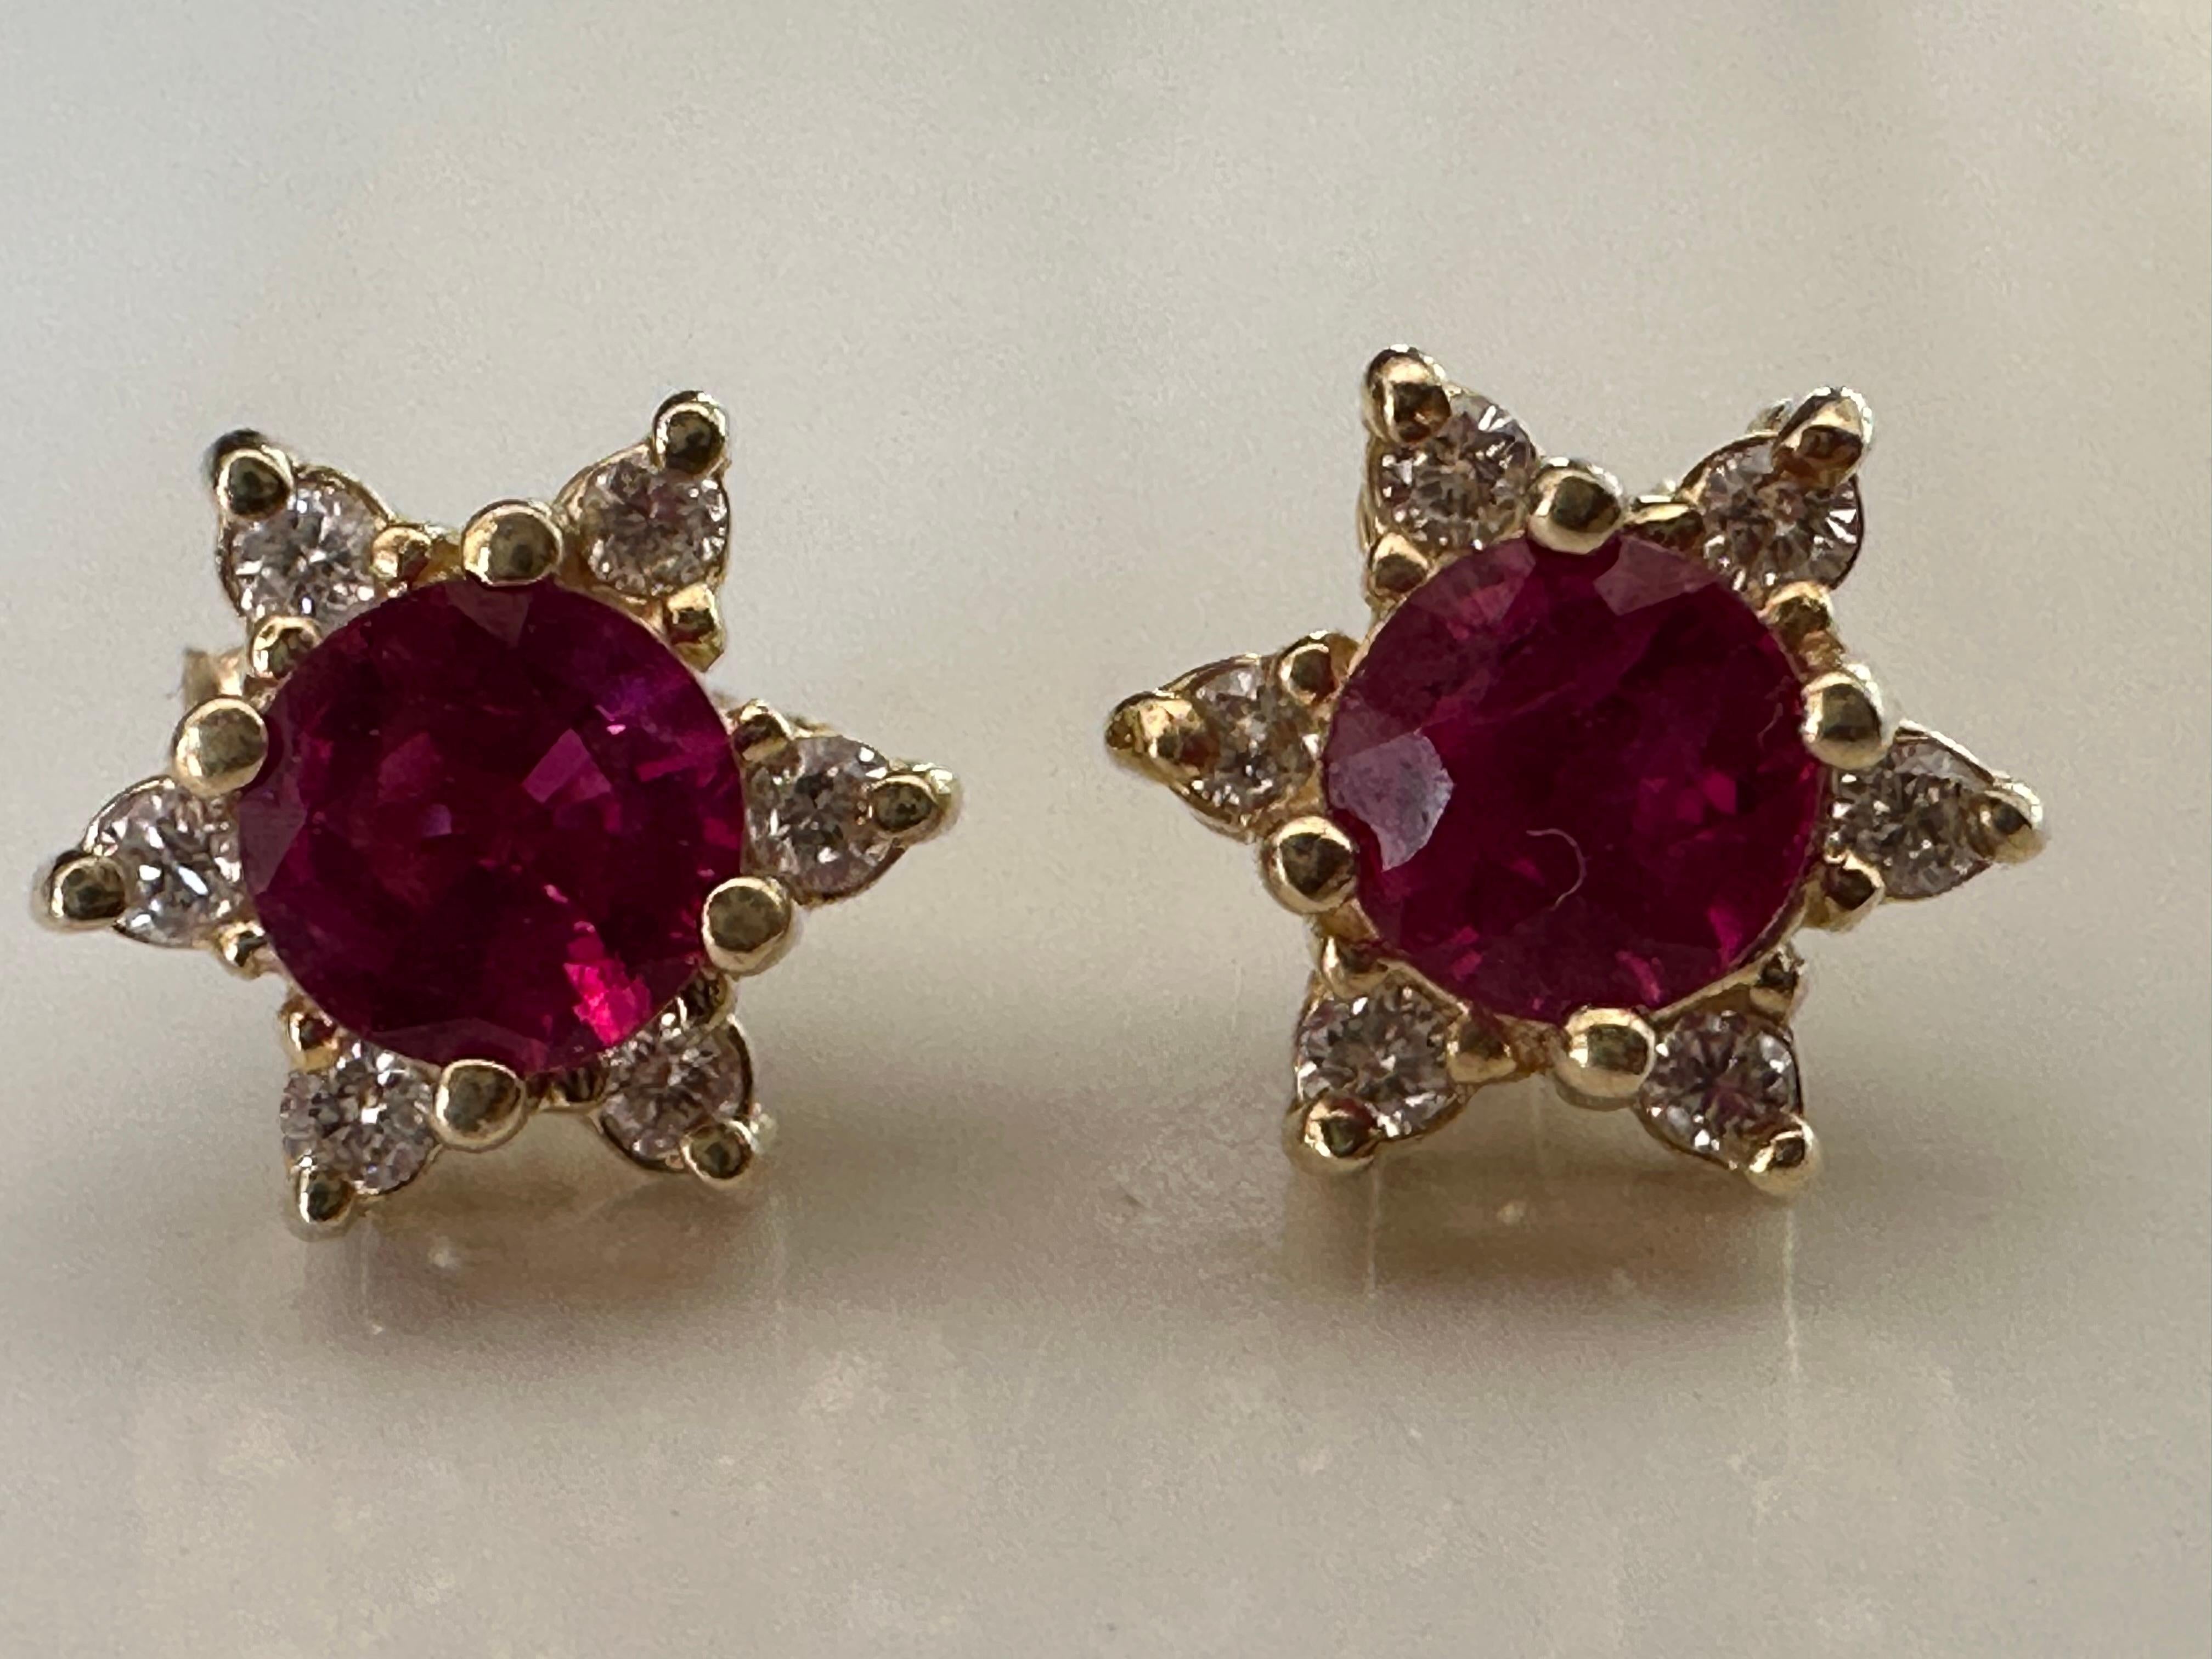 Crafted in 14K yellow gold, these earrings feature two natural round rubies each measuring 4.4mm, complemented by twelve glittering round brilliant-cut diamonds totaling approximately 0.12 carats set in a pretty floral design. 

